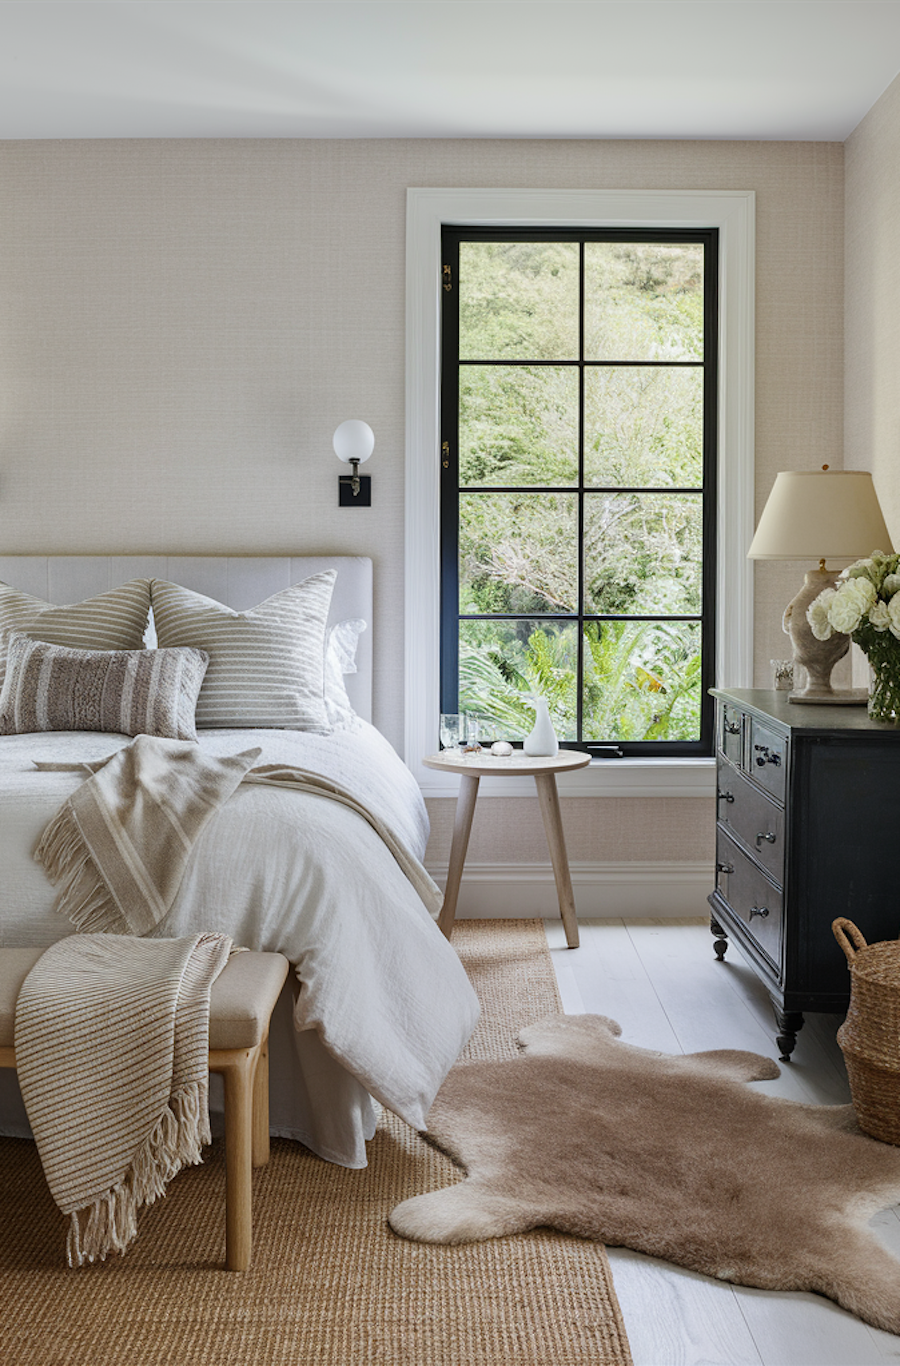 a coastal bedroom with contrasting shades and a minimalist decor